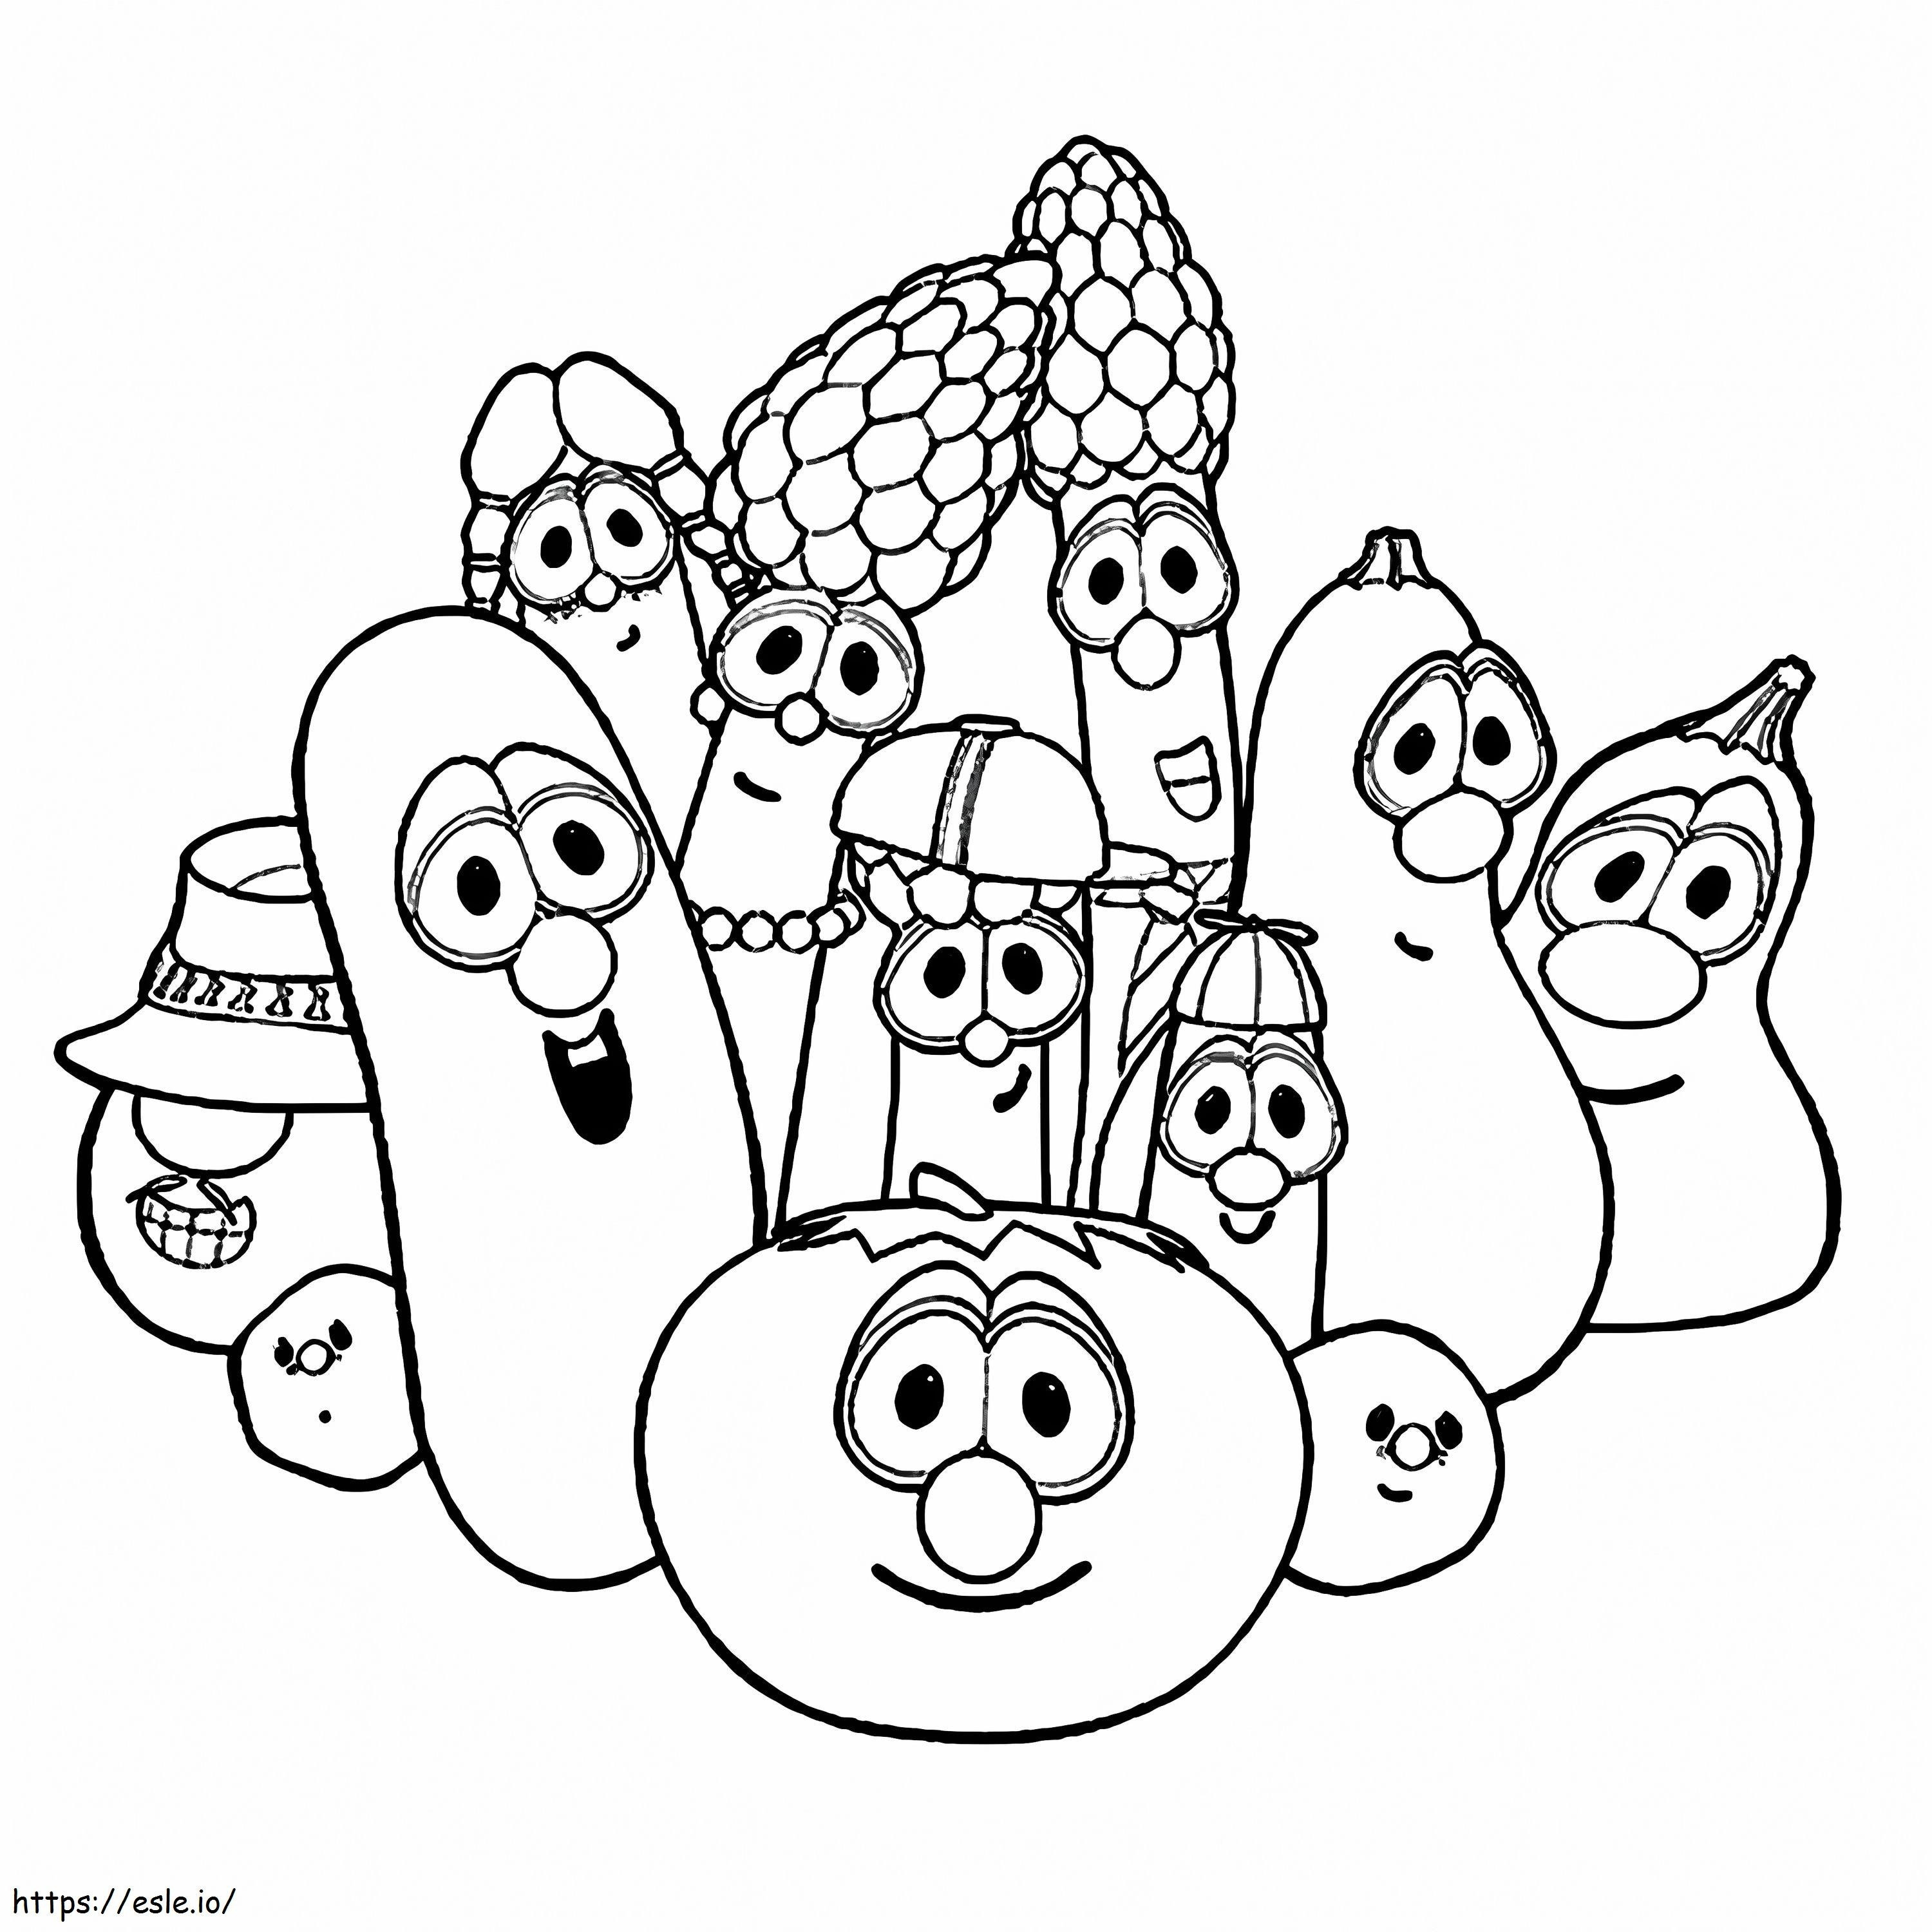 1543802274 Cartoon Vegetable coloring page